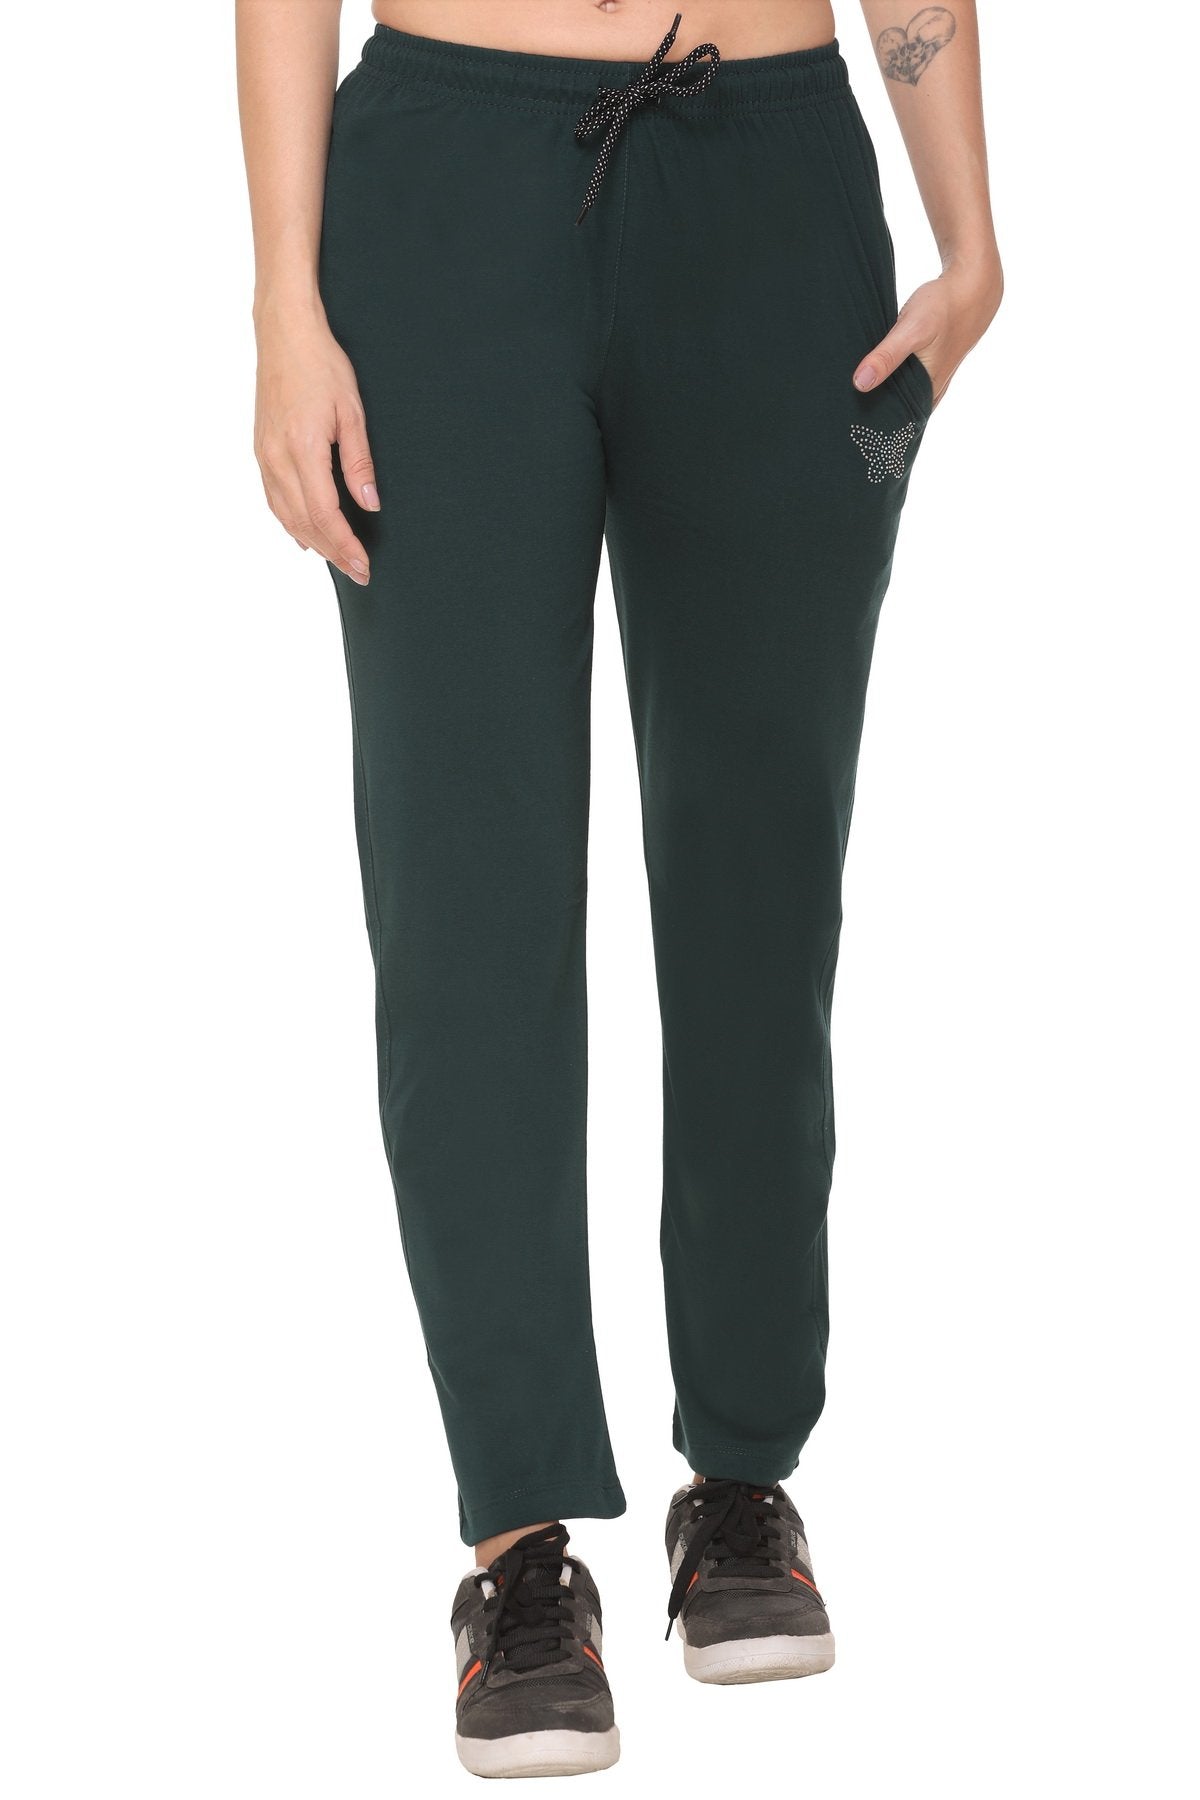 Buy online Girls Solid Cotton Track Pants from boys for Women by Ak for  999 at 58 off  2023 Limeroadcom